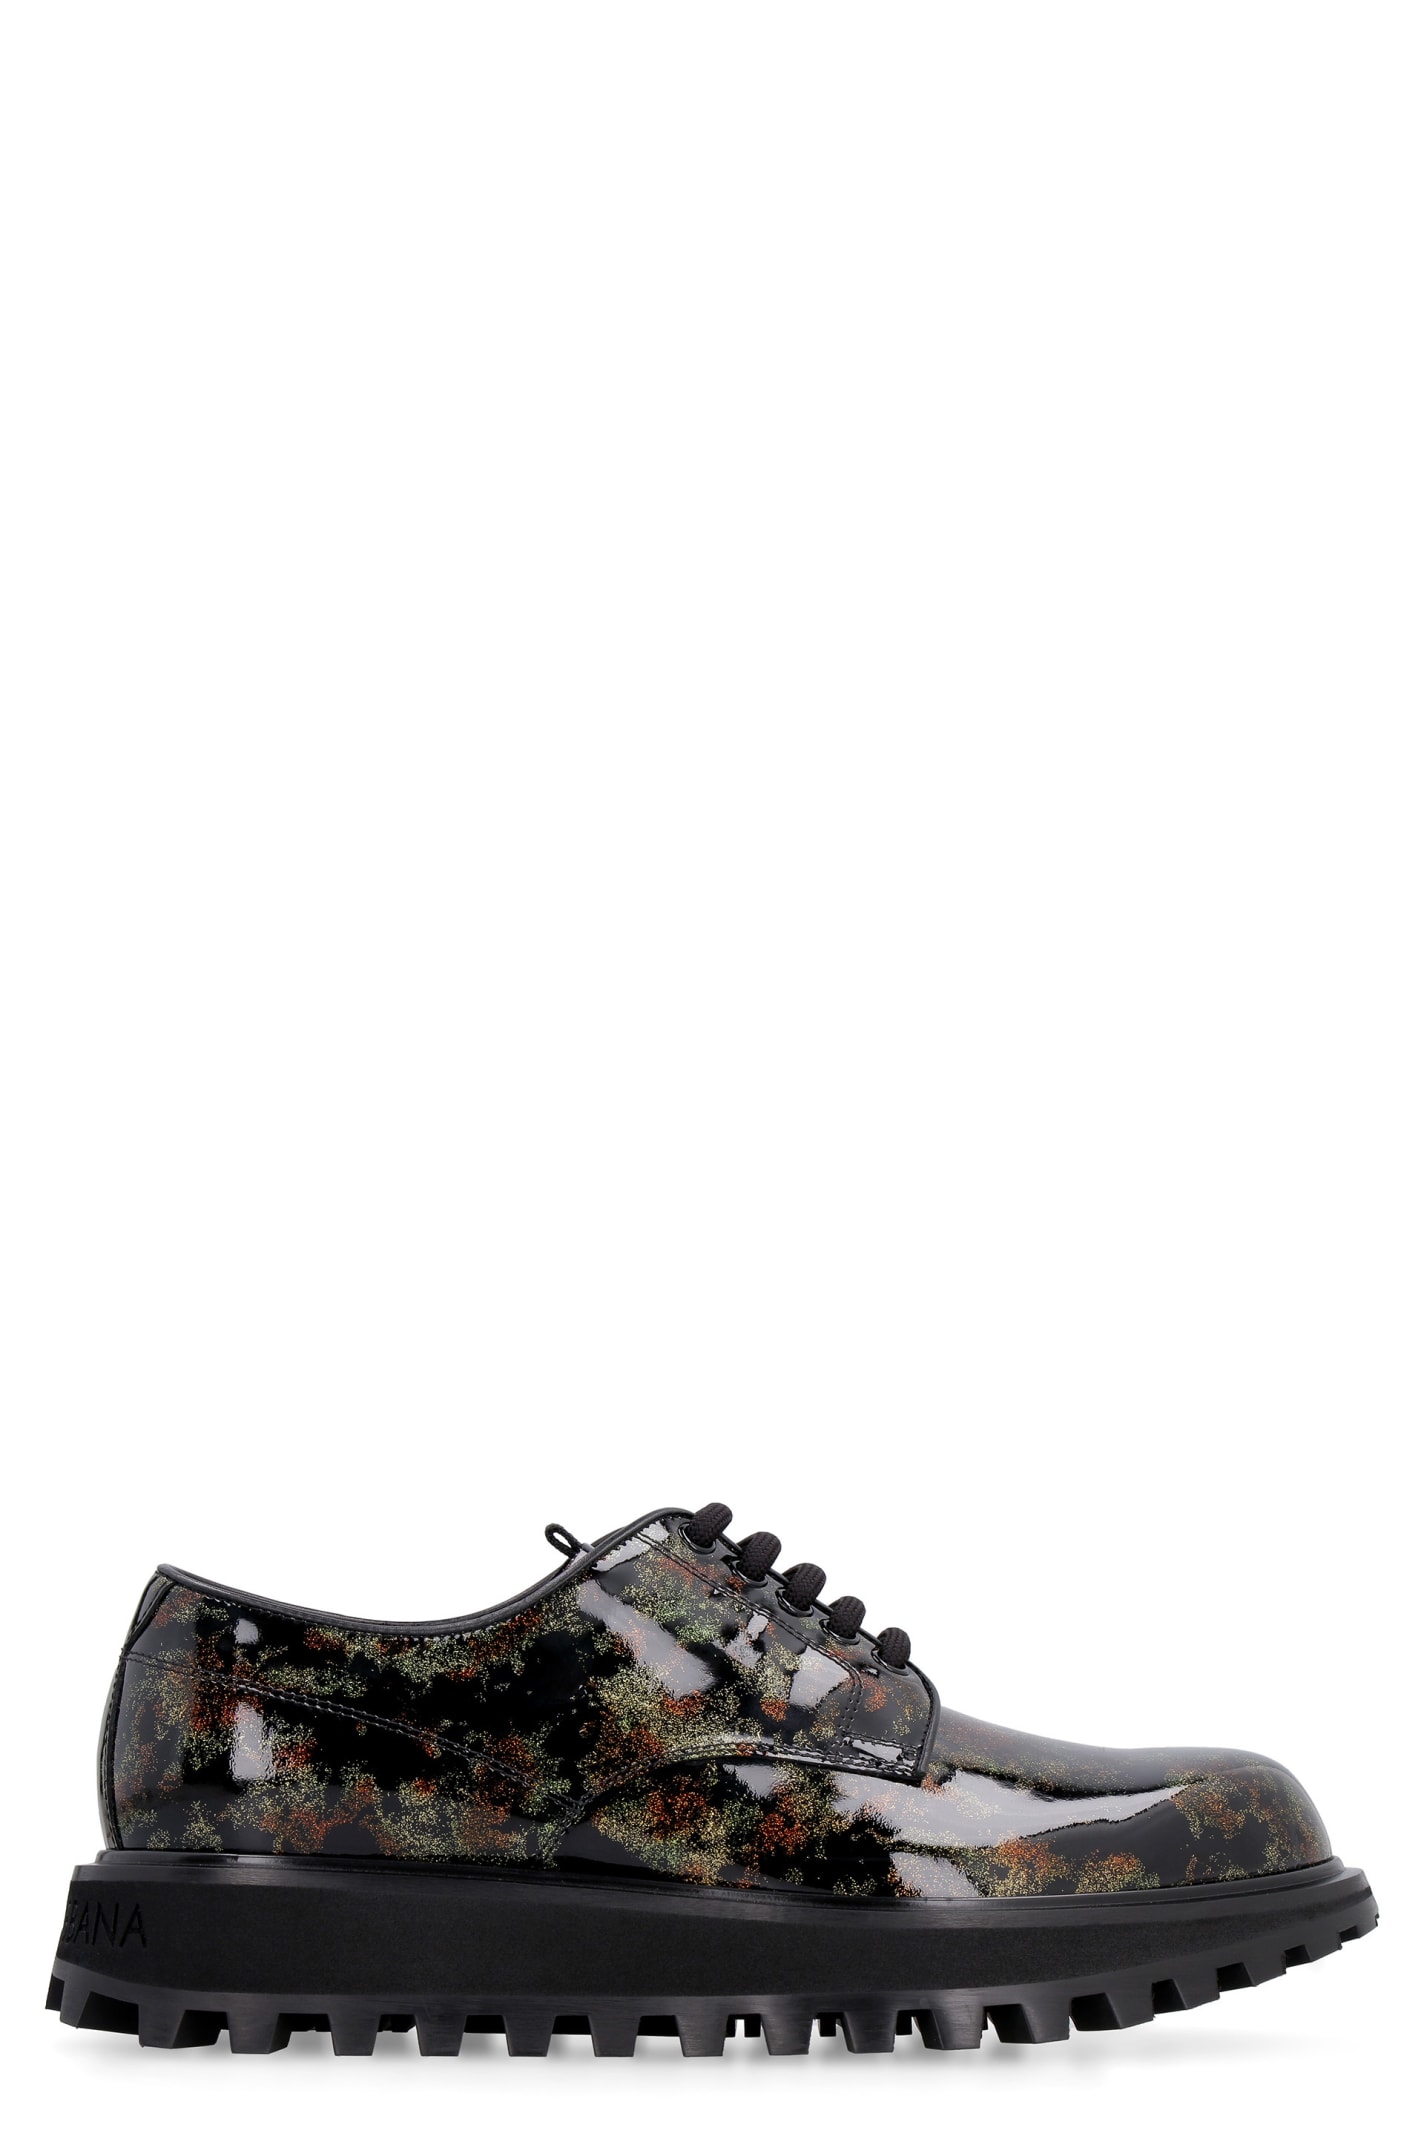 DOLCE & GABBANA GLITTERED PATENT LEATHER DERBY SHOES,11233045